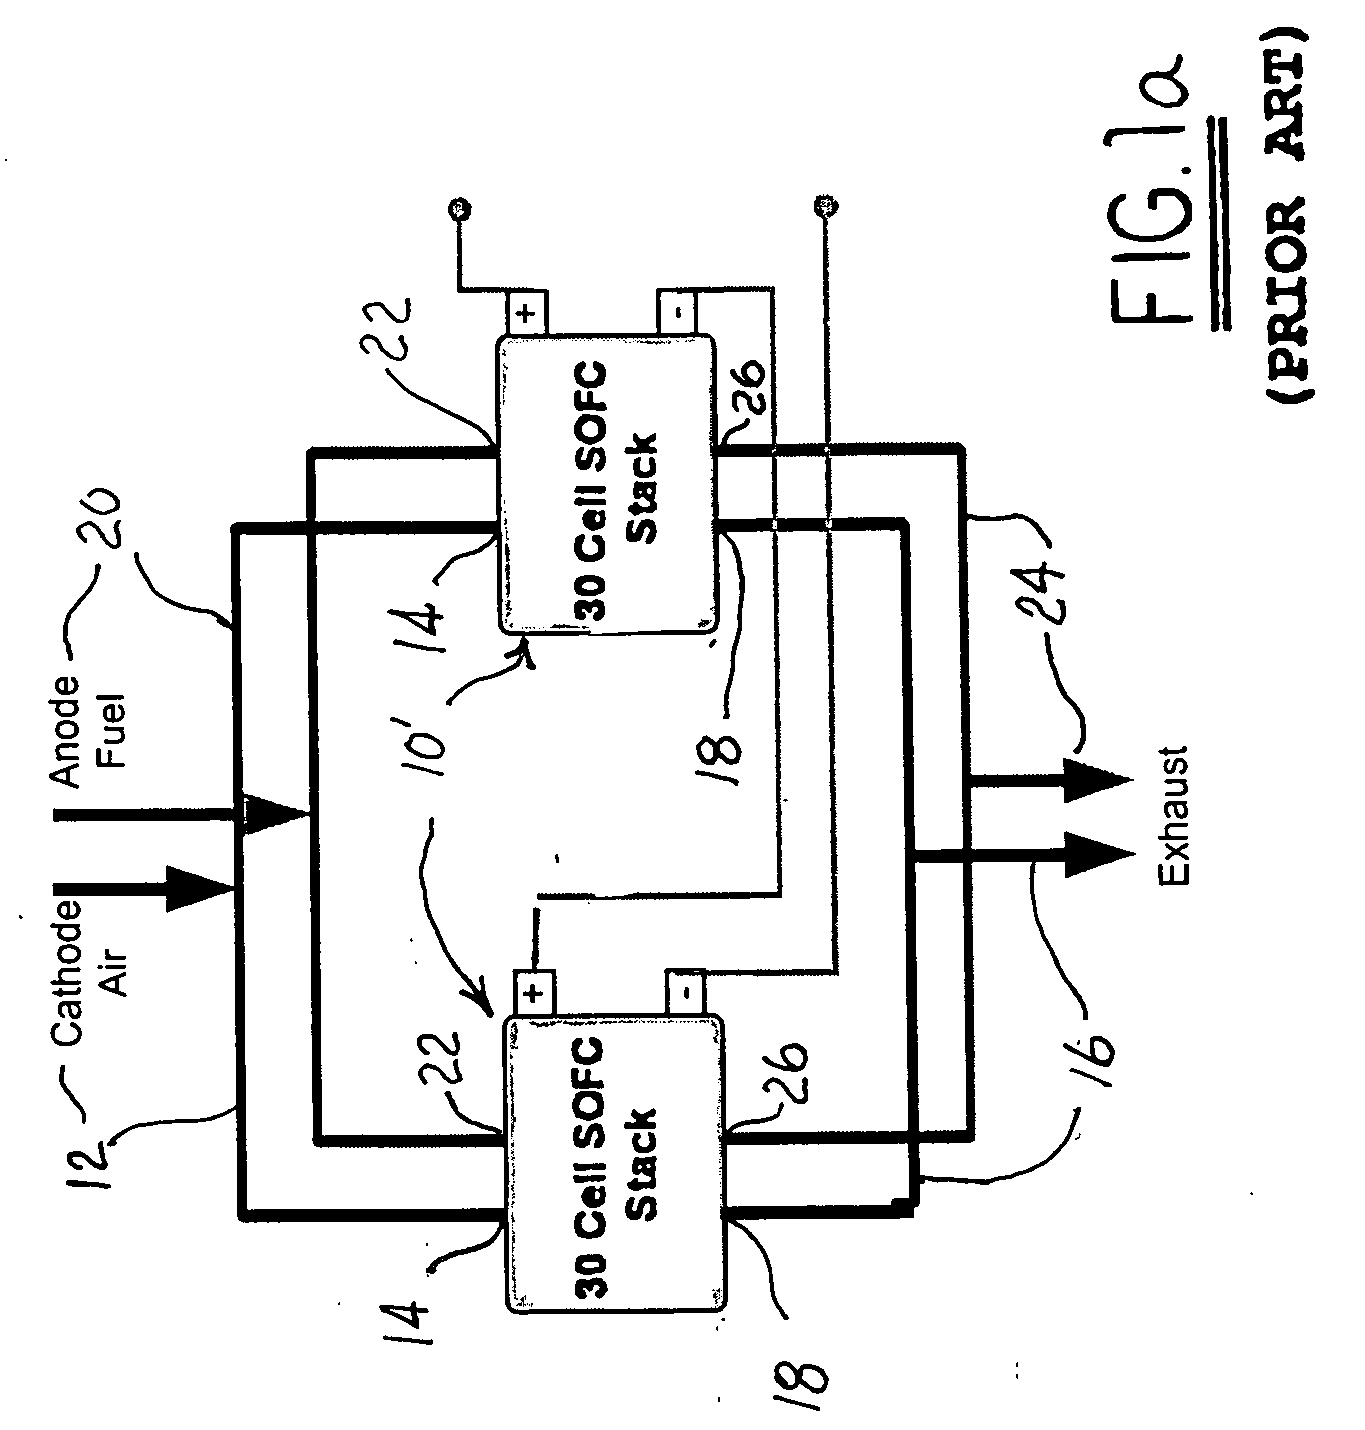 Method and apparatus for thermal, mechanical, and electrical optimization of a solid-oxide fuel cell stack